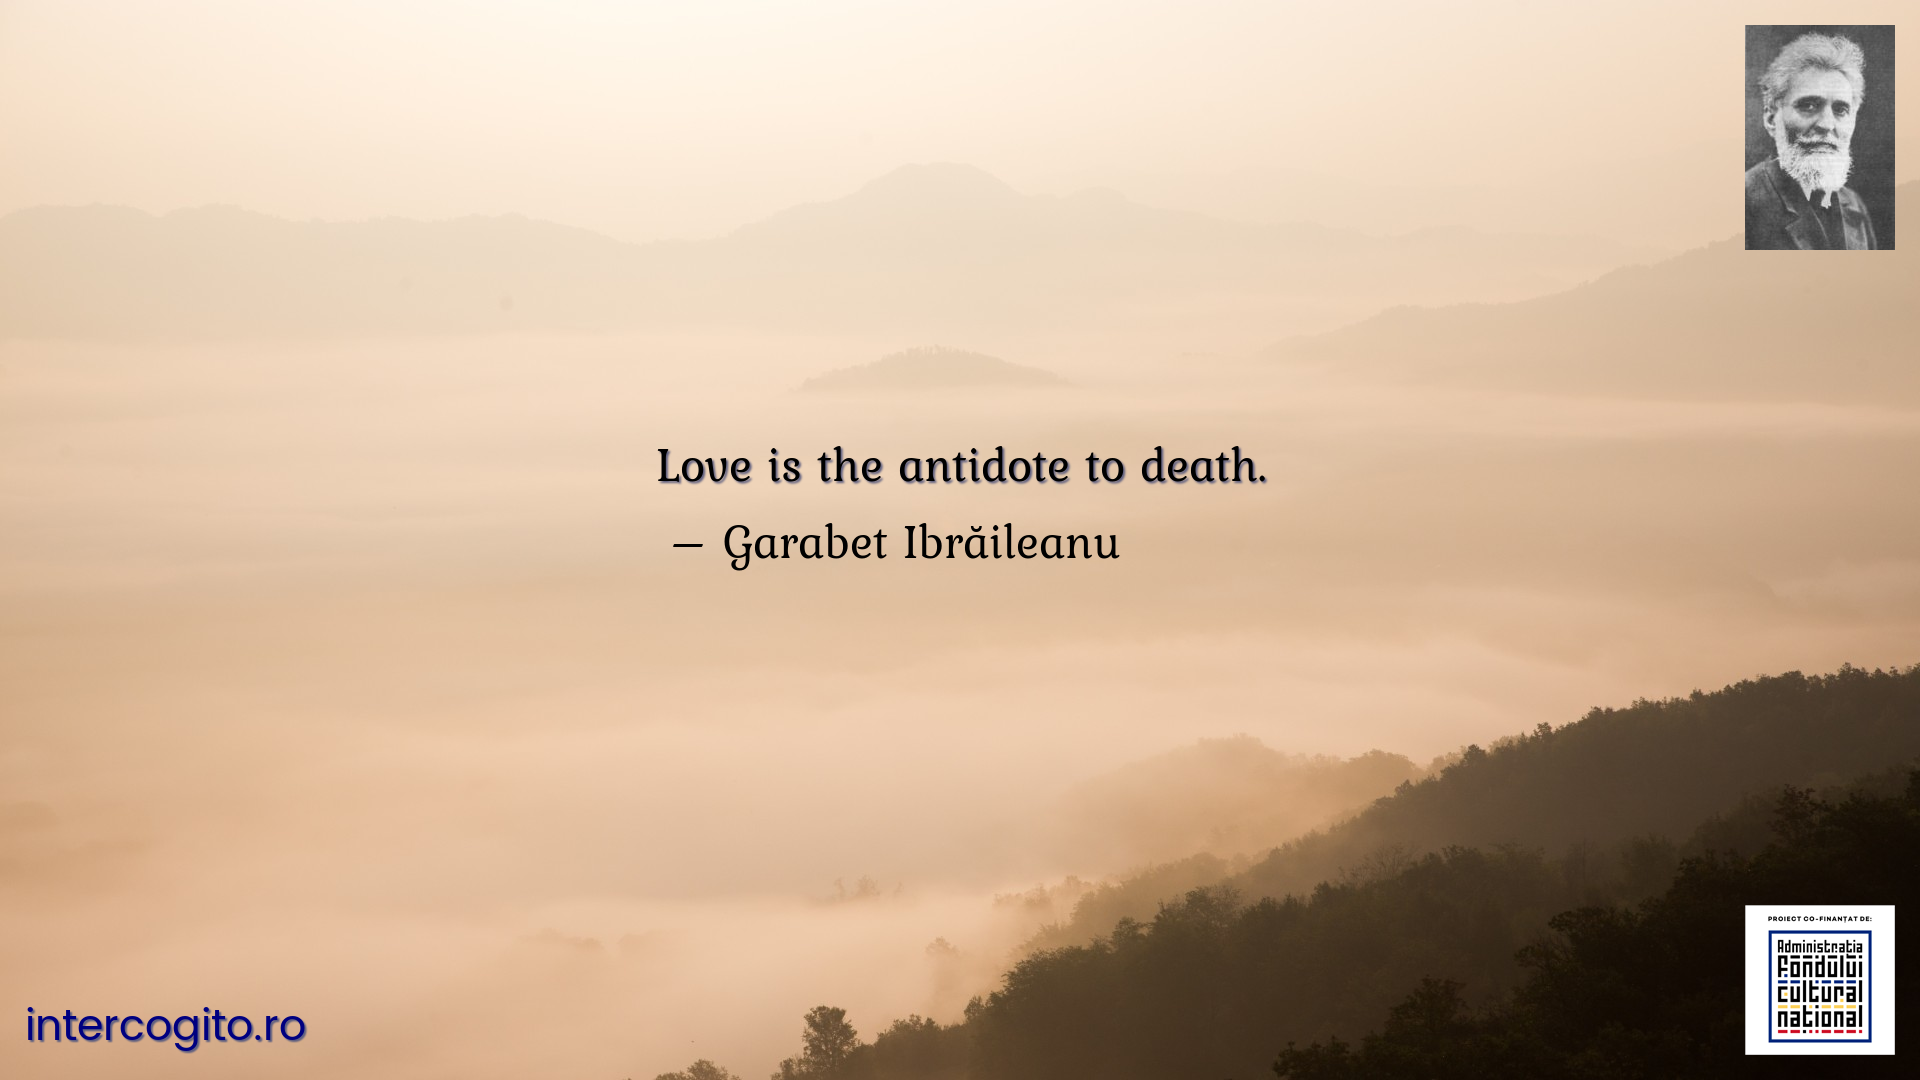 Love is the antidote to death.